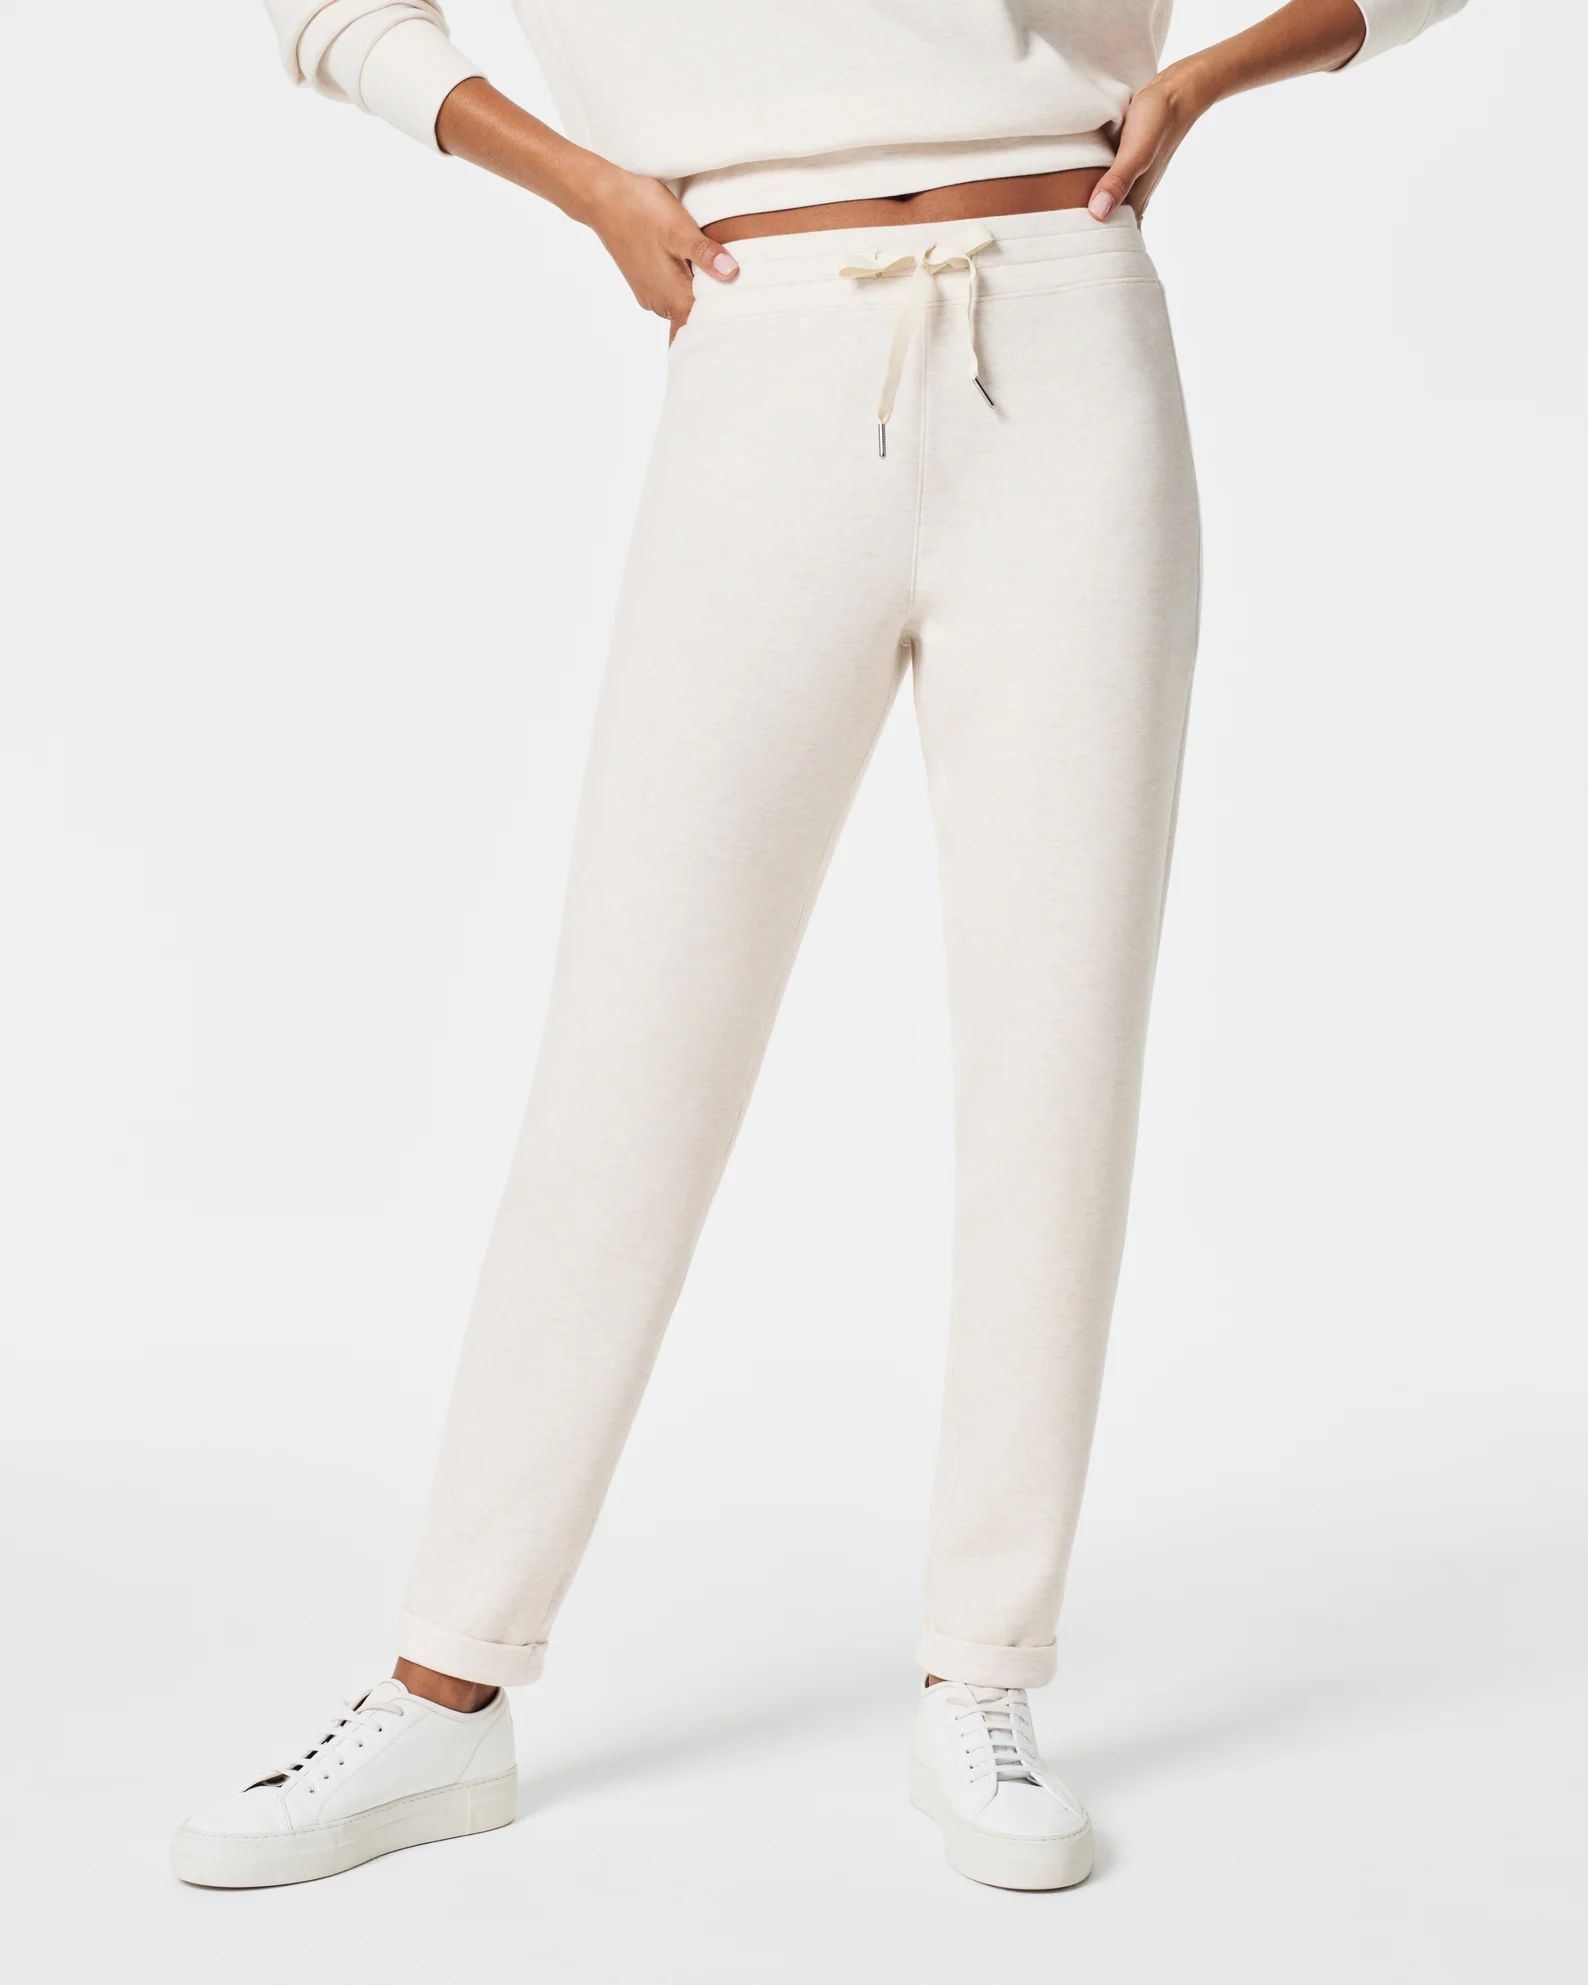 AirEssentials Tapered Pant | Spanx